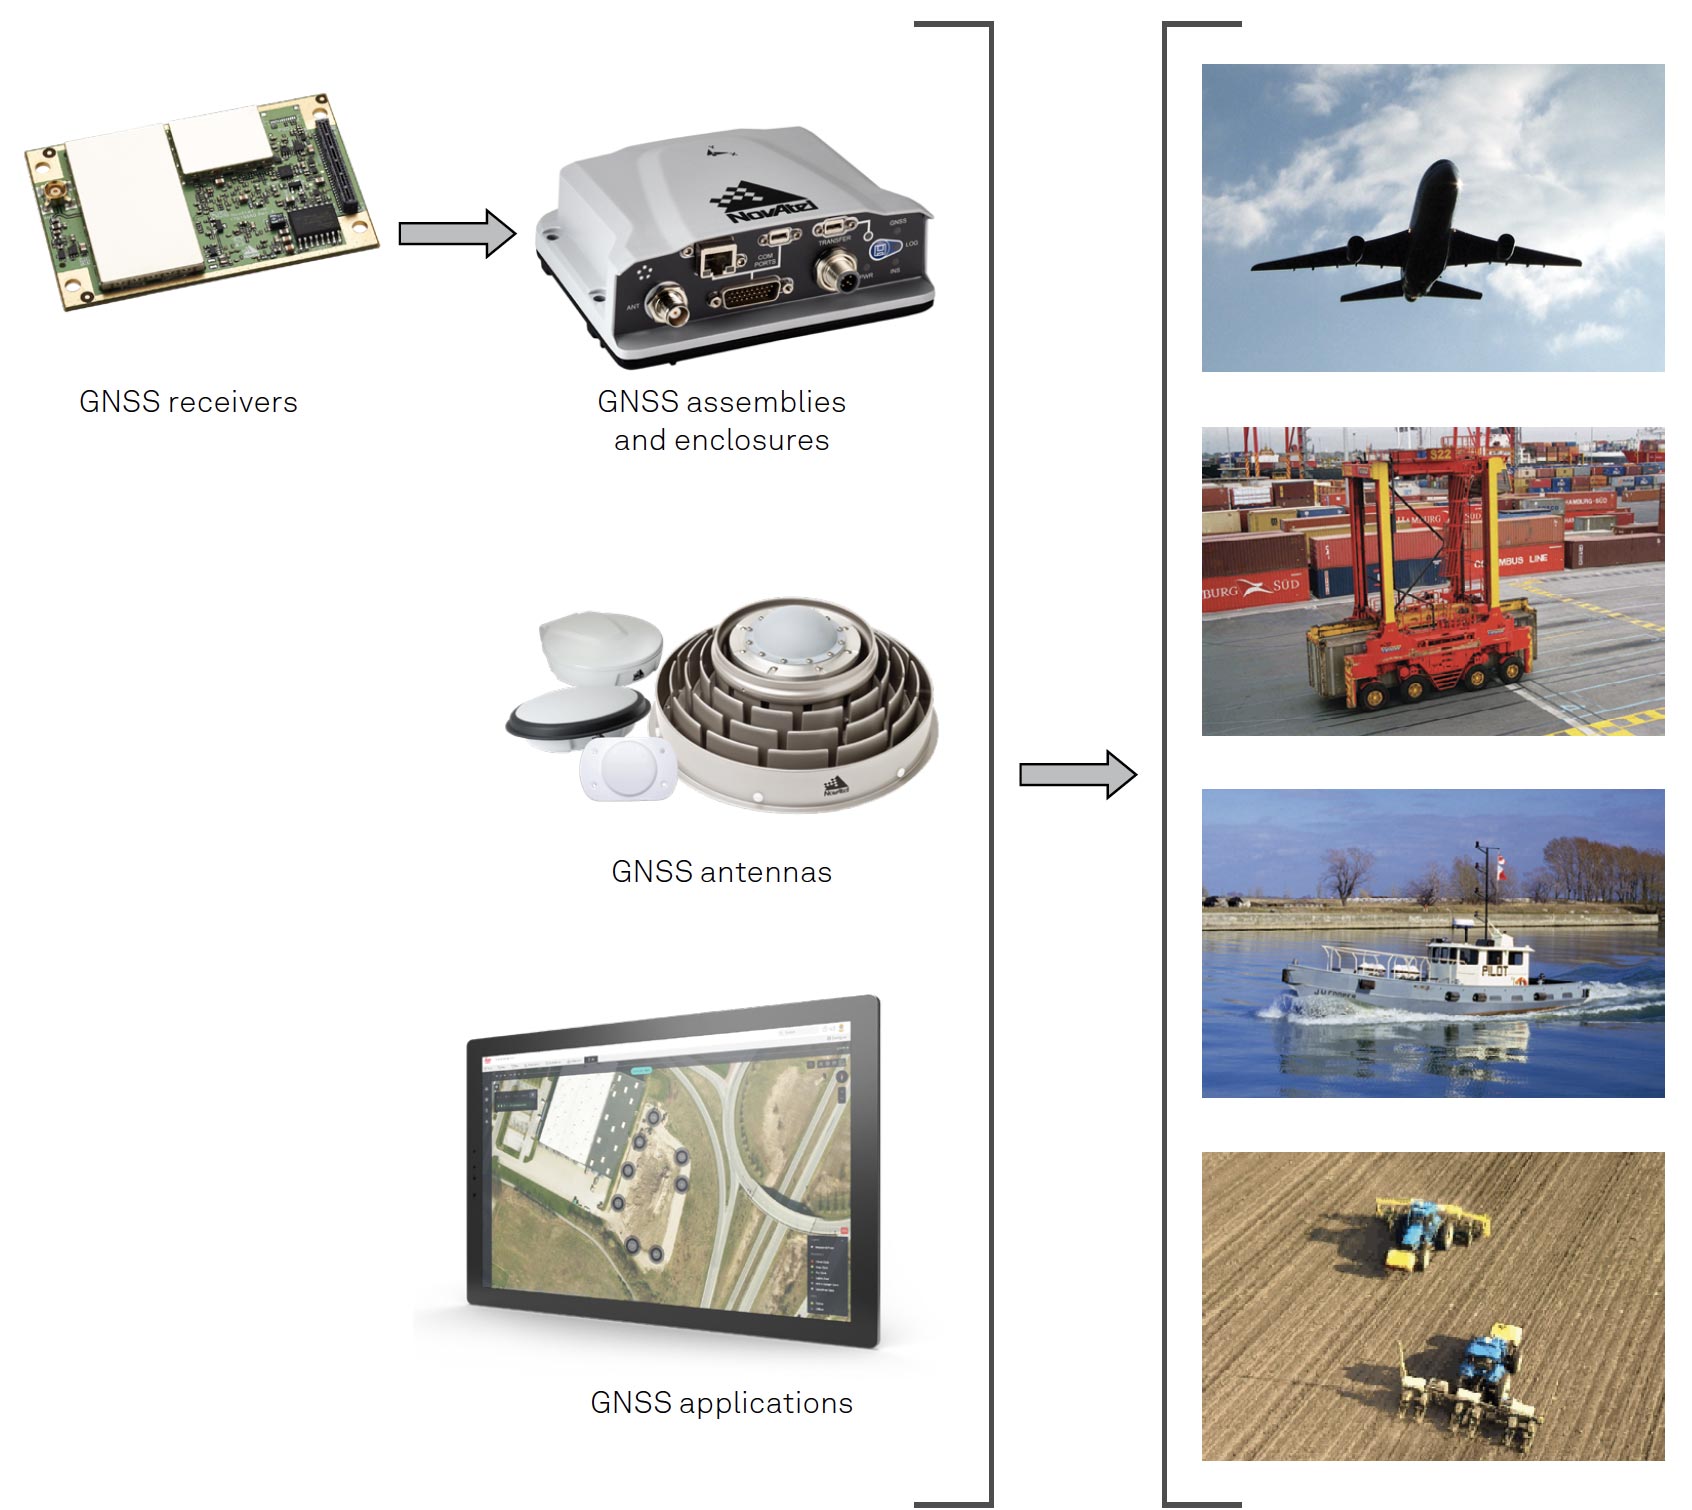 Figure 69 Examples of GNSS equipment